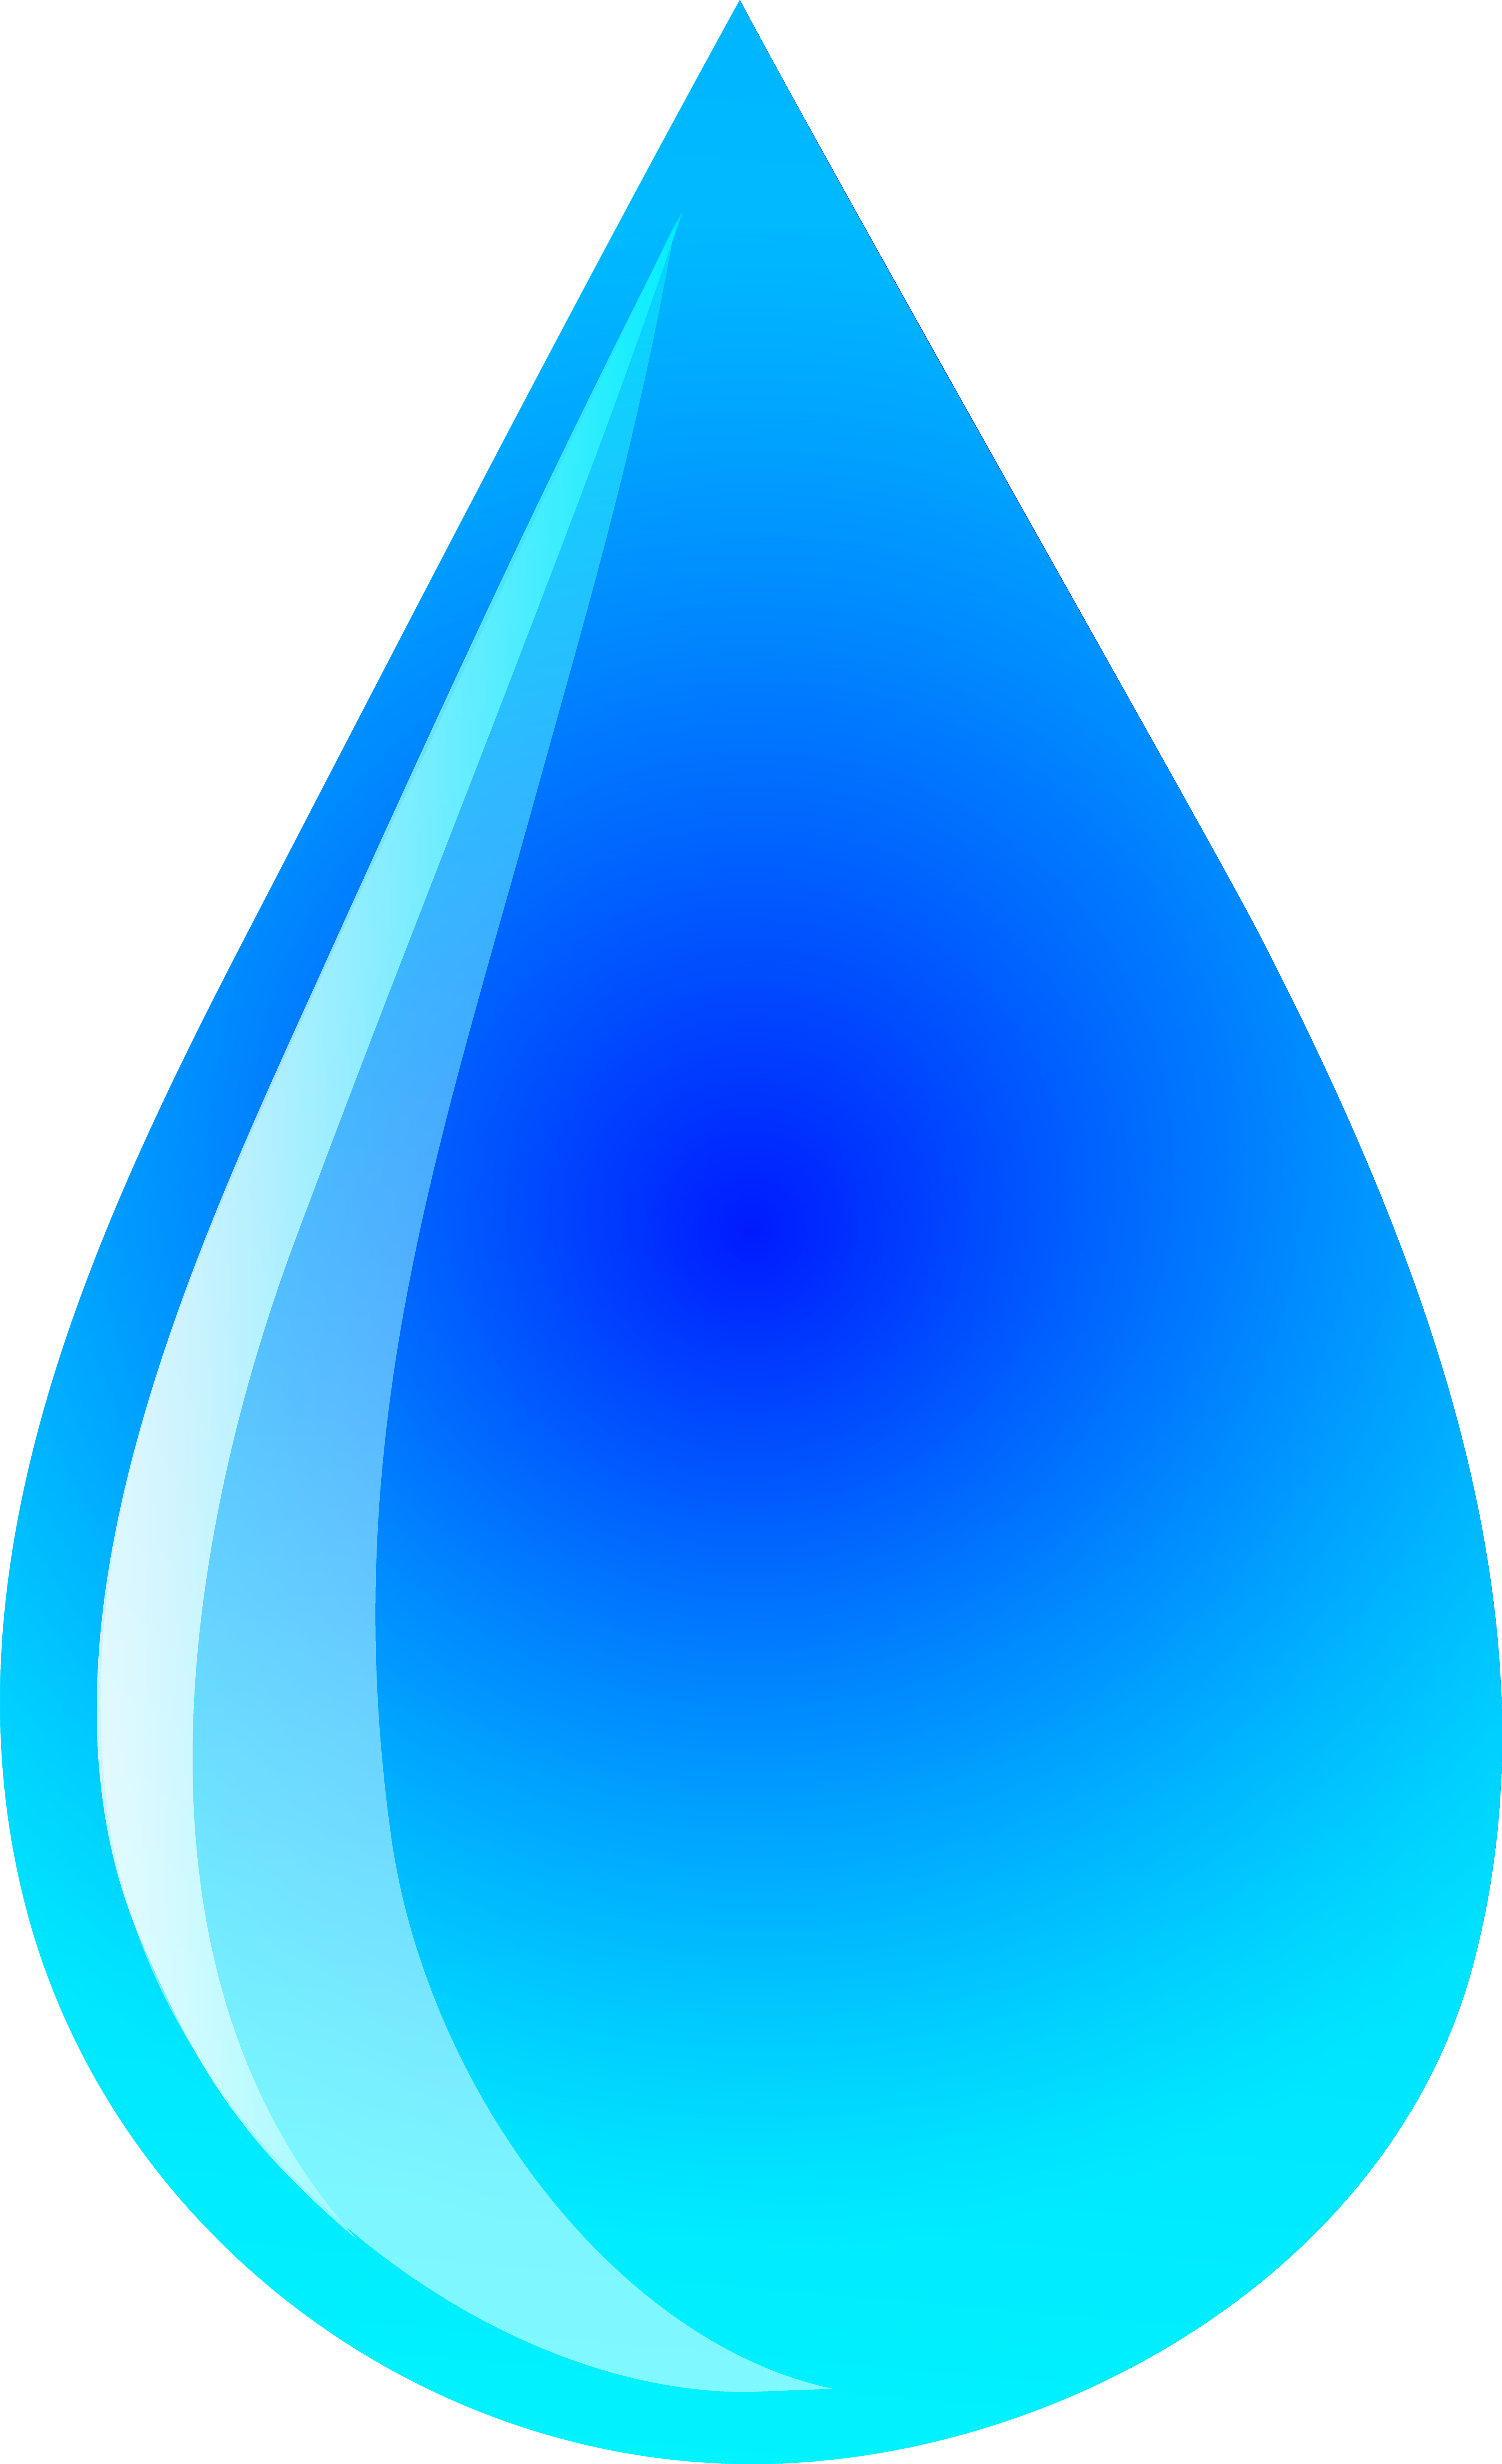 Water clipart blue. Free tear cliparts download